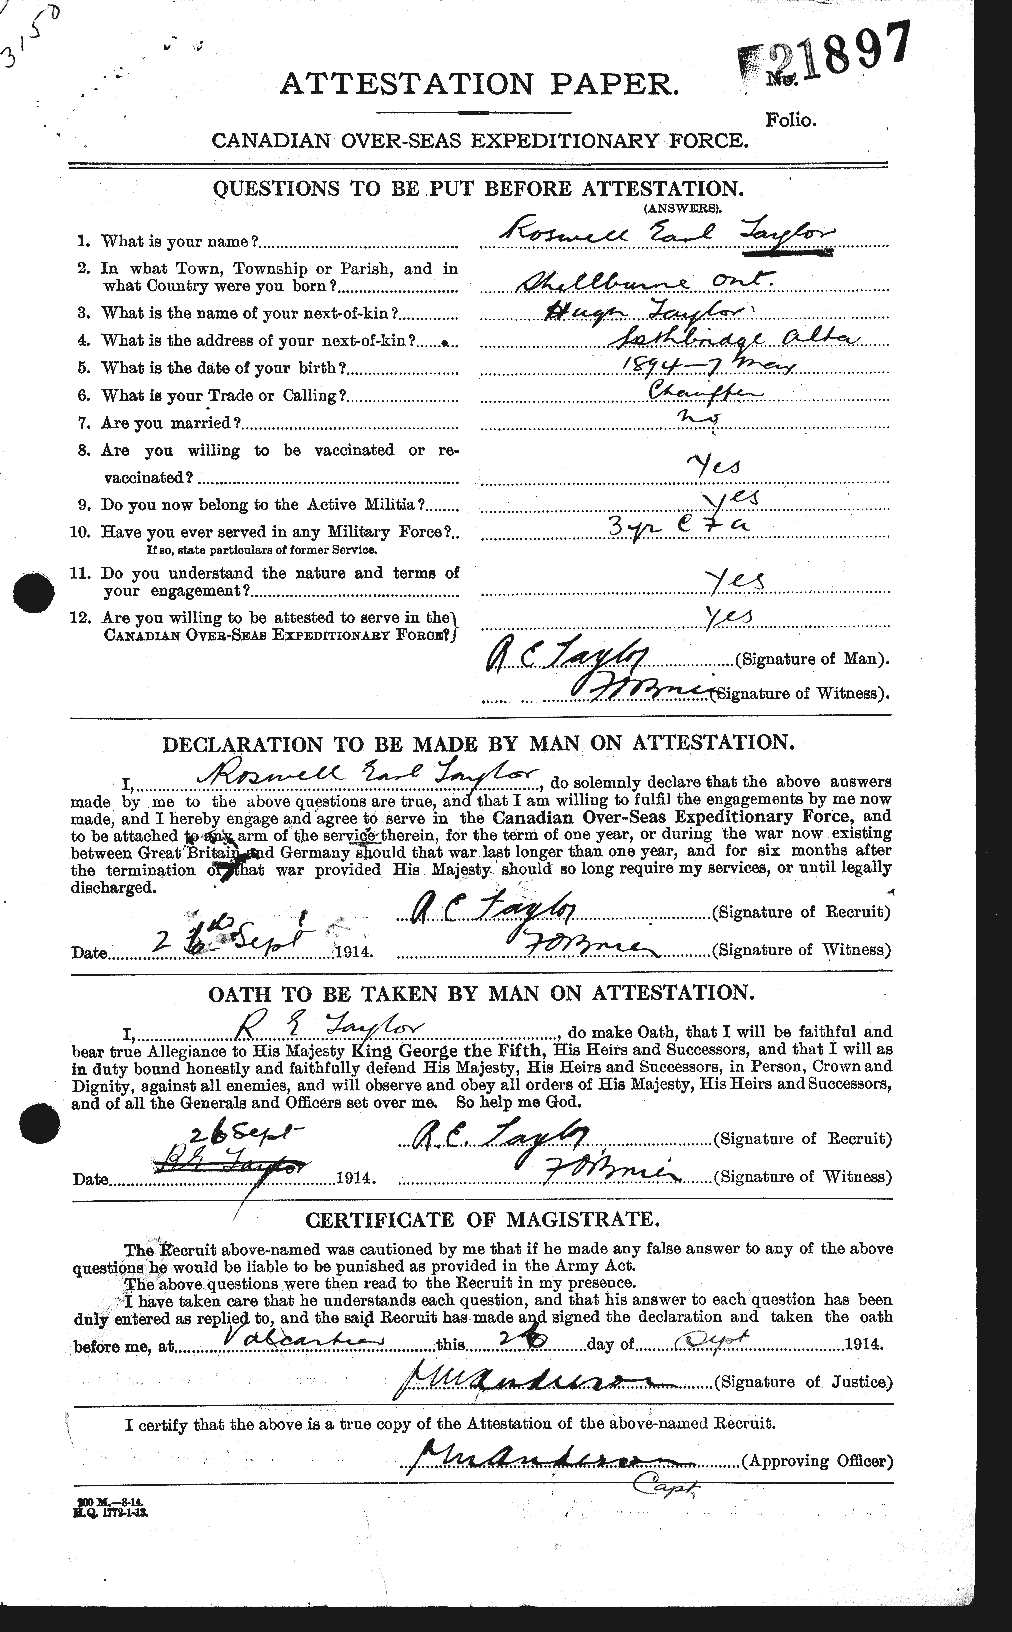 Personnel Records of the First World War - CEF 627517a